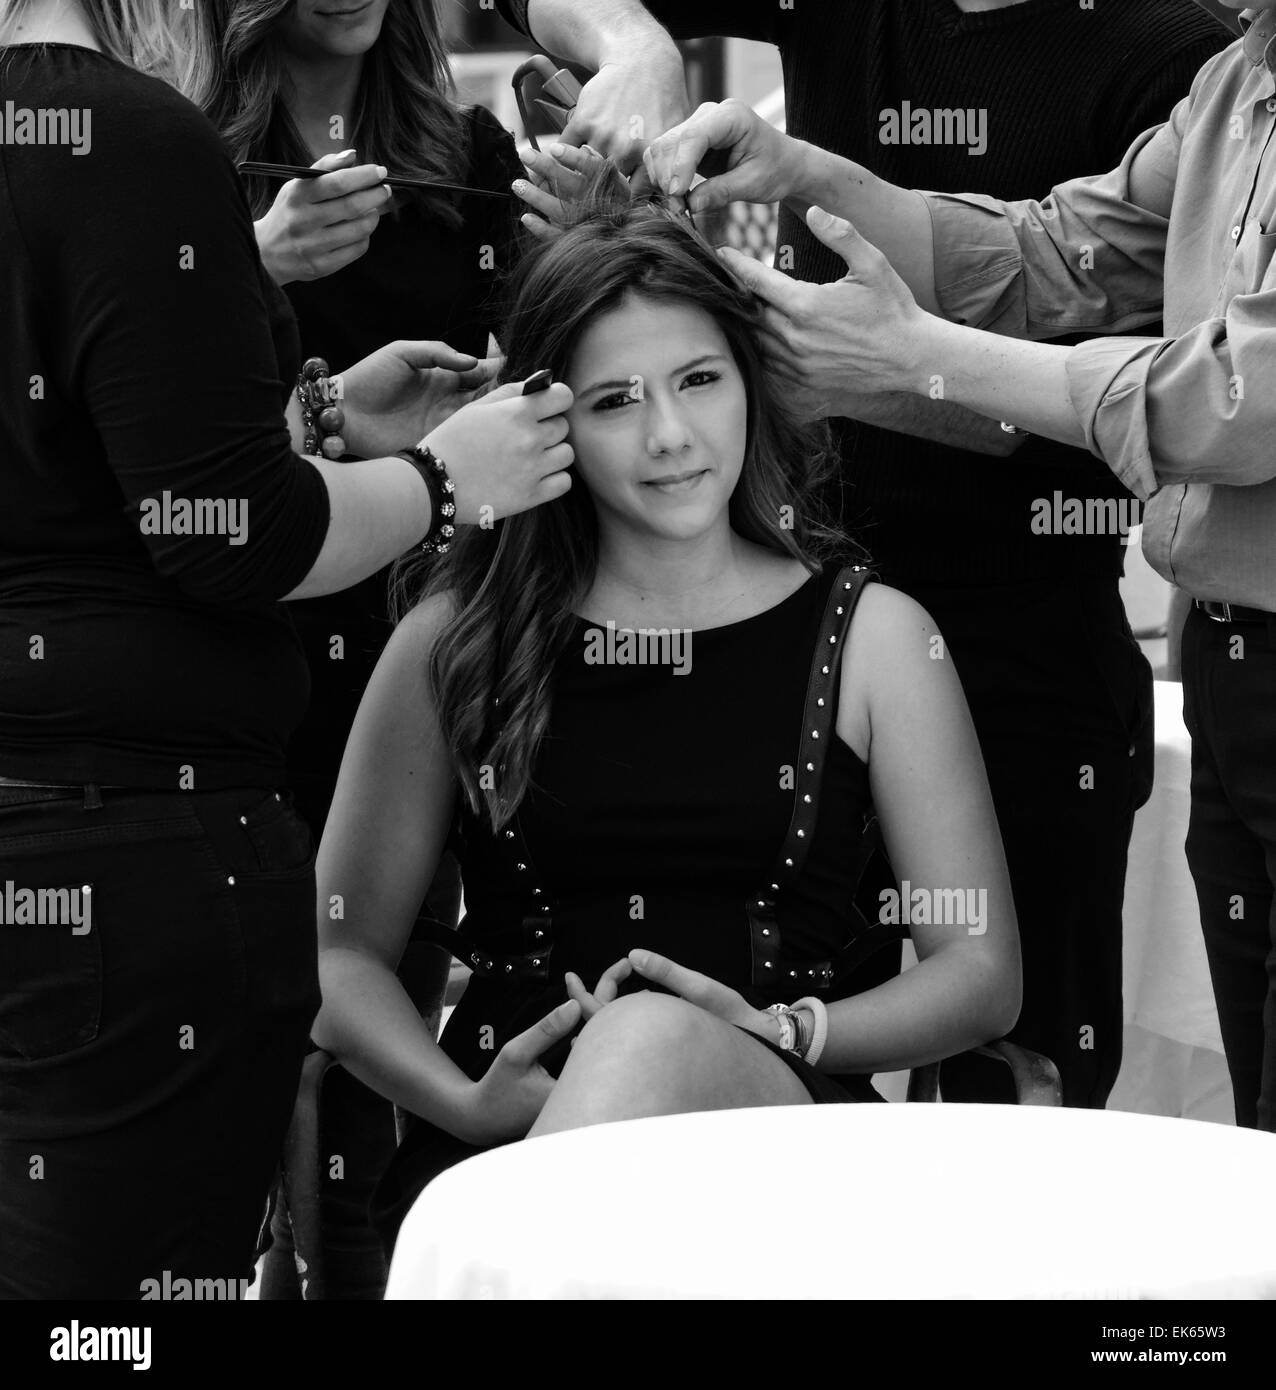 Italy, Sicily, young girl having her hair combed by hairdressers Stock Photo